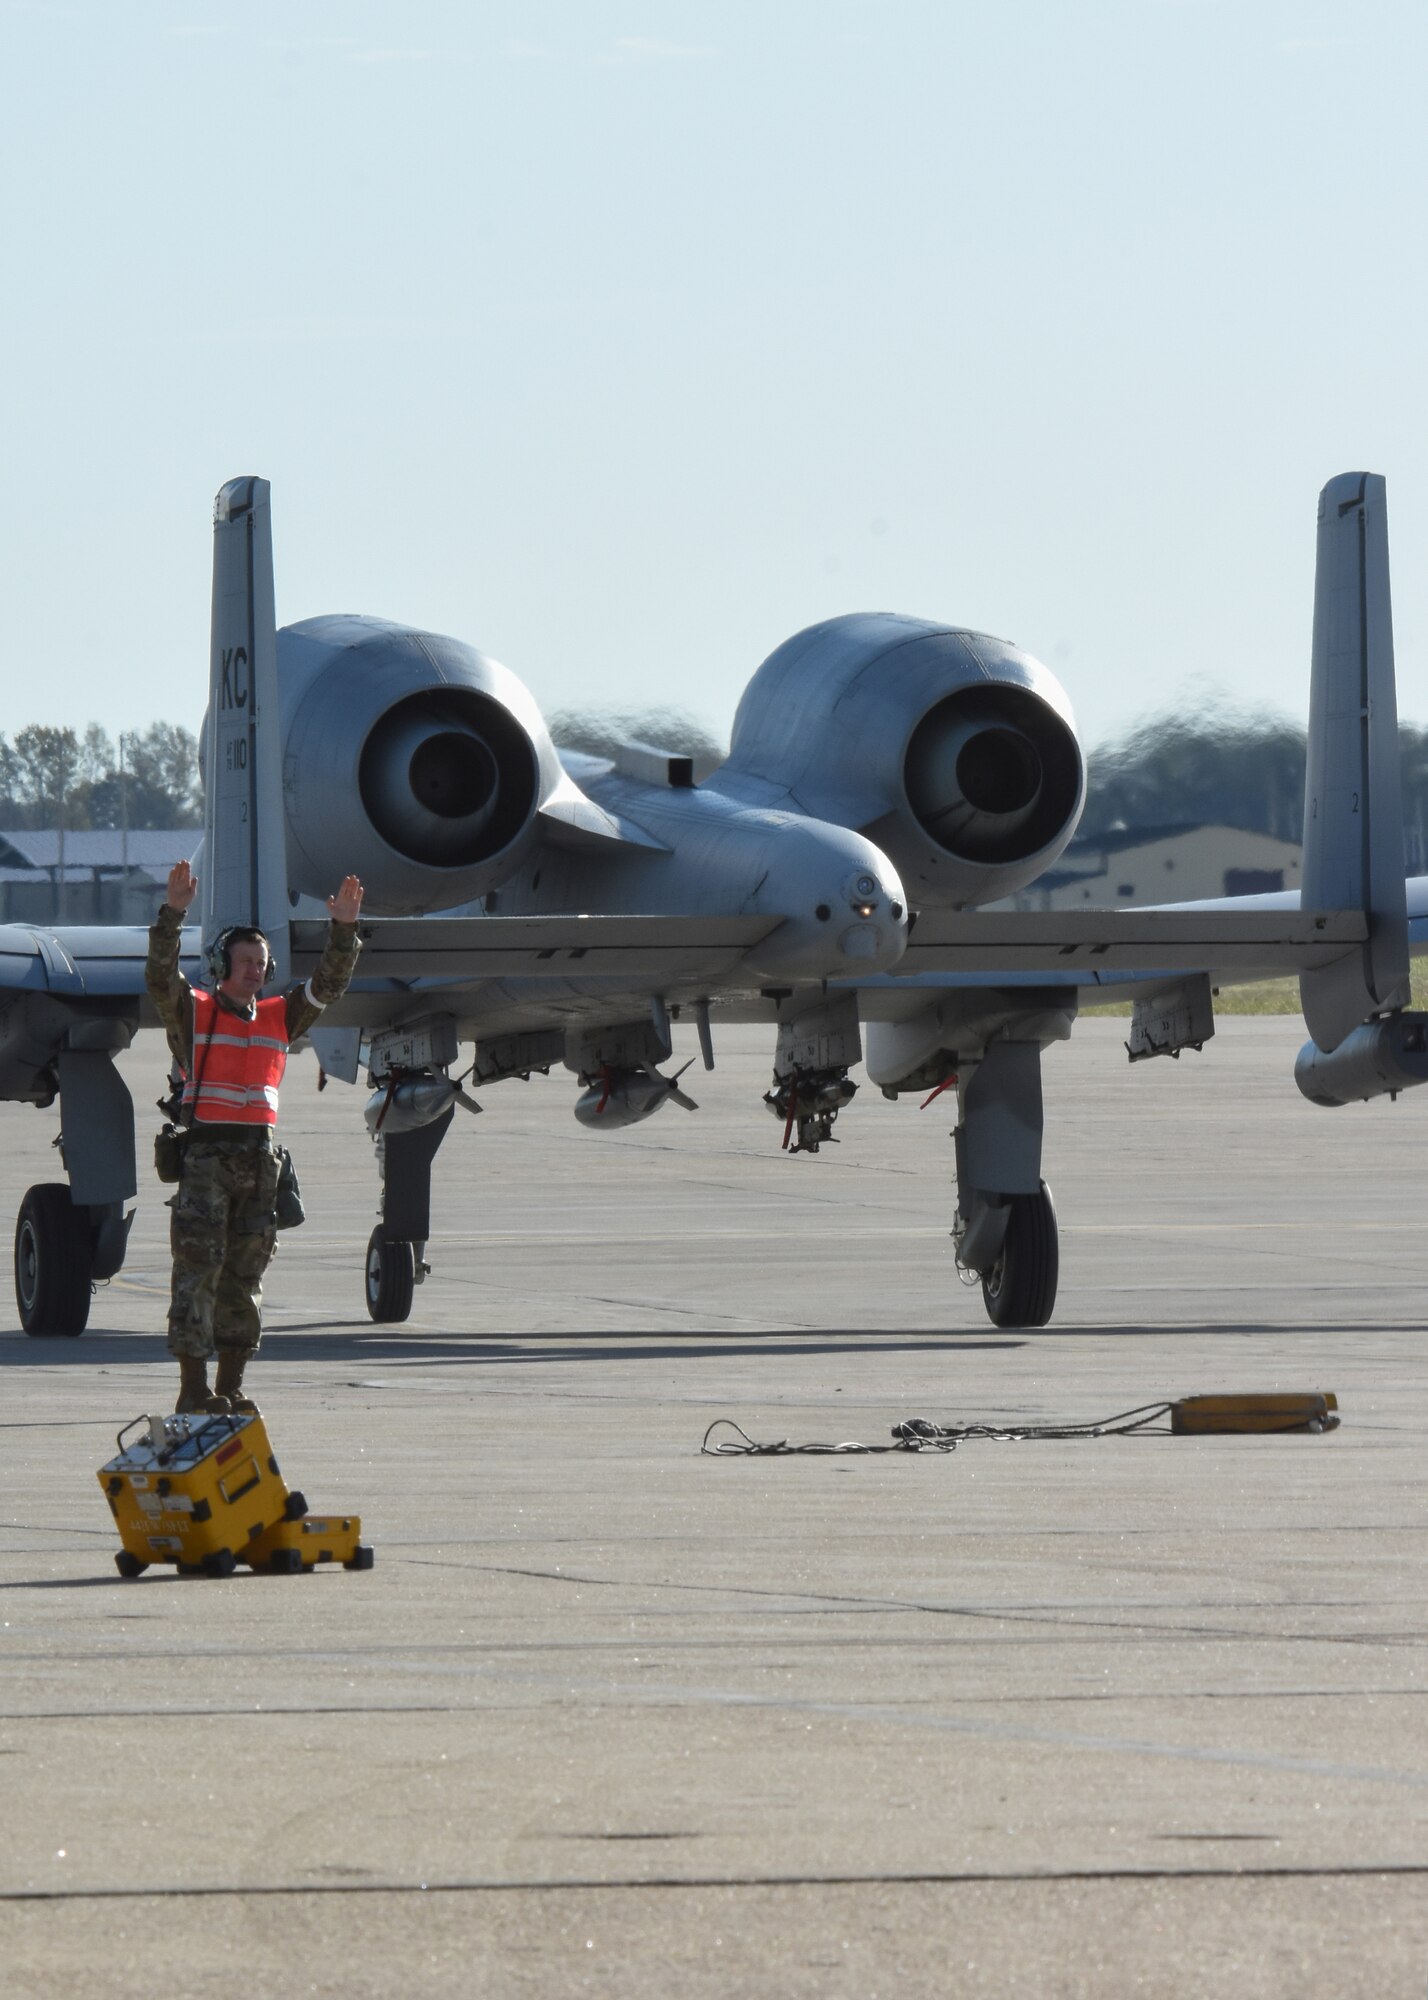 Senior Airman Kyle Jans, an avionics technician with the 442d Aircraft Maintenance Squadron specialist flight, signals a A-10 Thunderbolt II forward at Whiteman Air Force Base, Mo., Nov. 3, 2019. Before the aircraft can take off, the technicians test the radar warning receiving pits to ensure the missile warning capabilities on the aircraft are working properly.